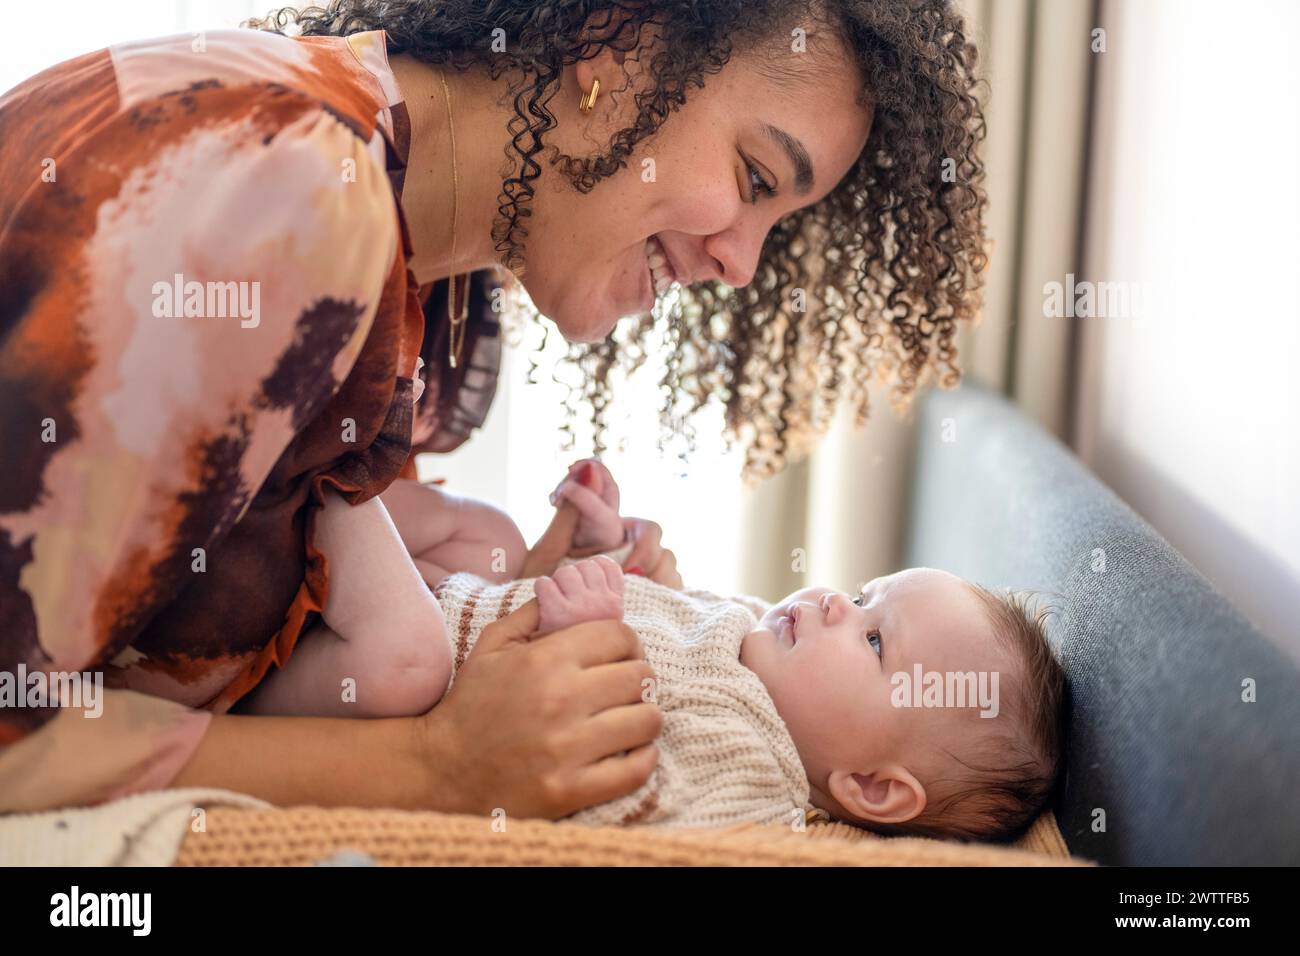 A heartwarming moment as a mother smiles lovingly at her baby. Stock Photo